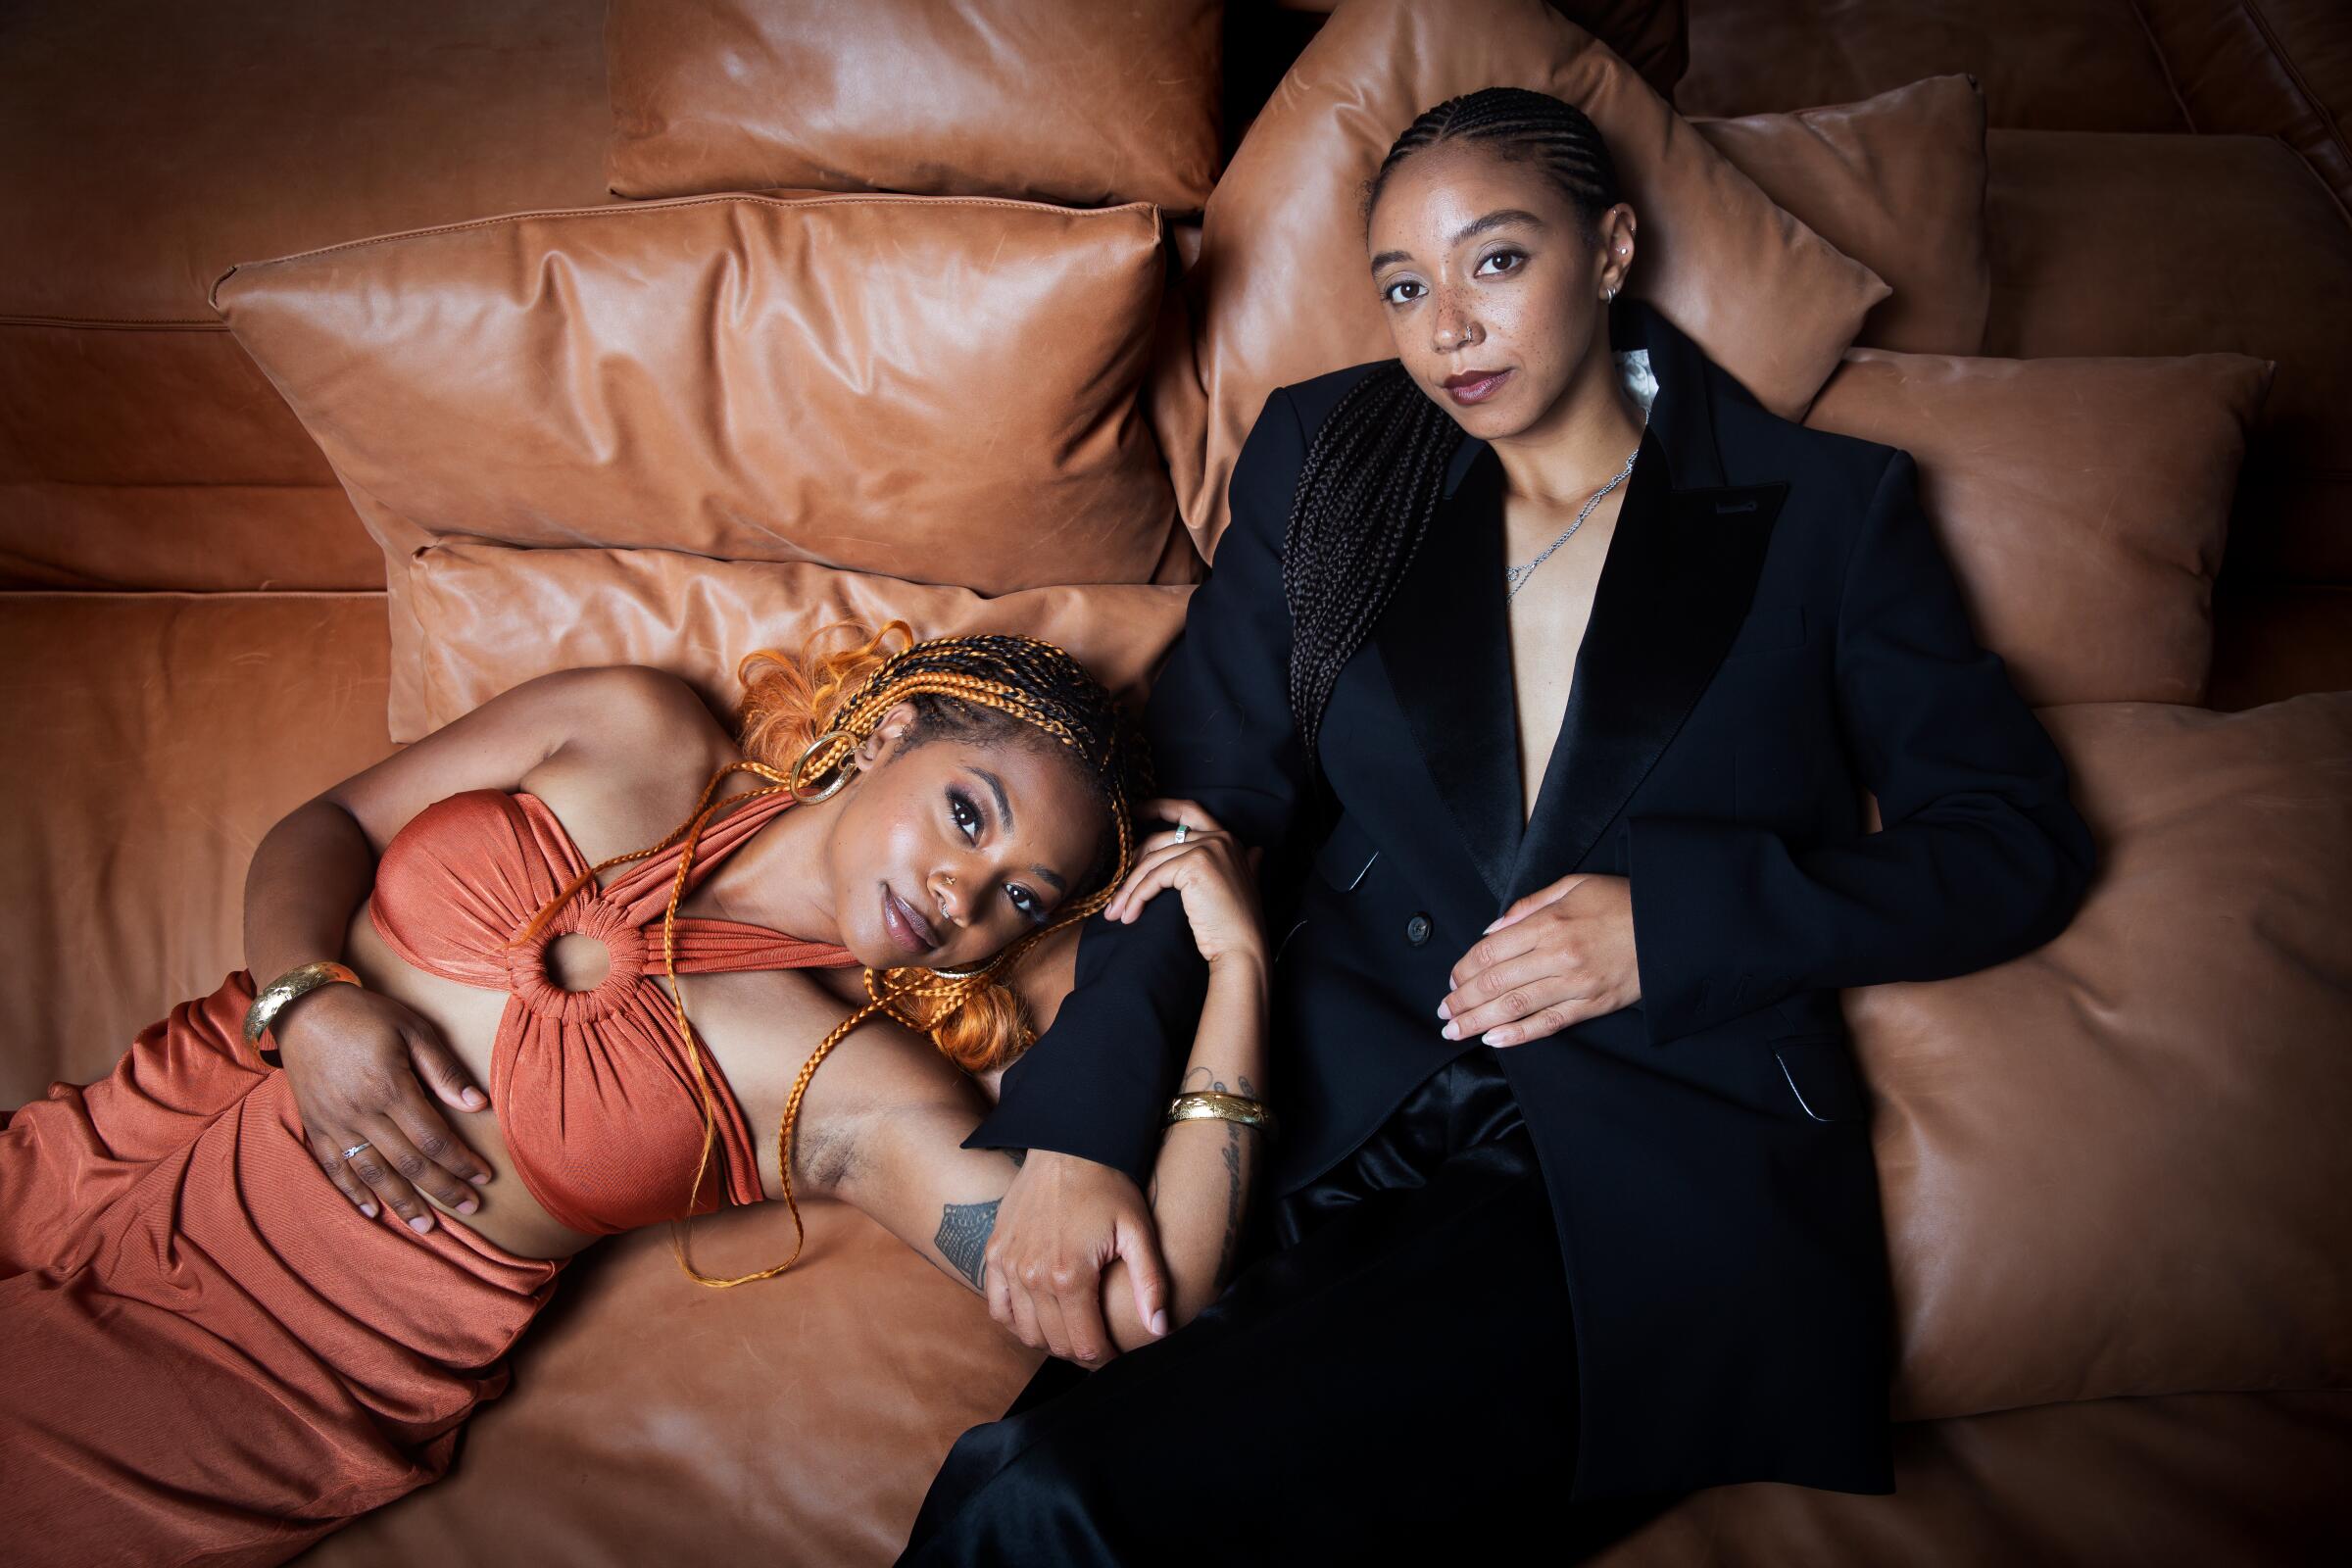 Two women recline on a leather sofa